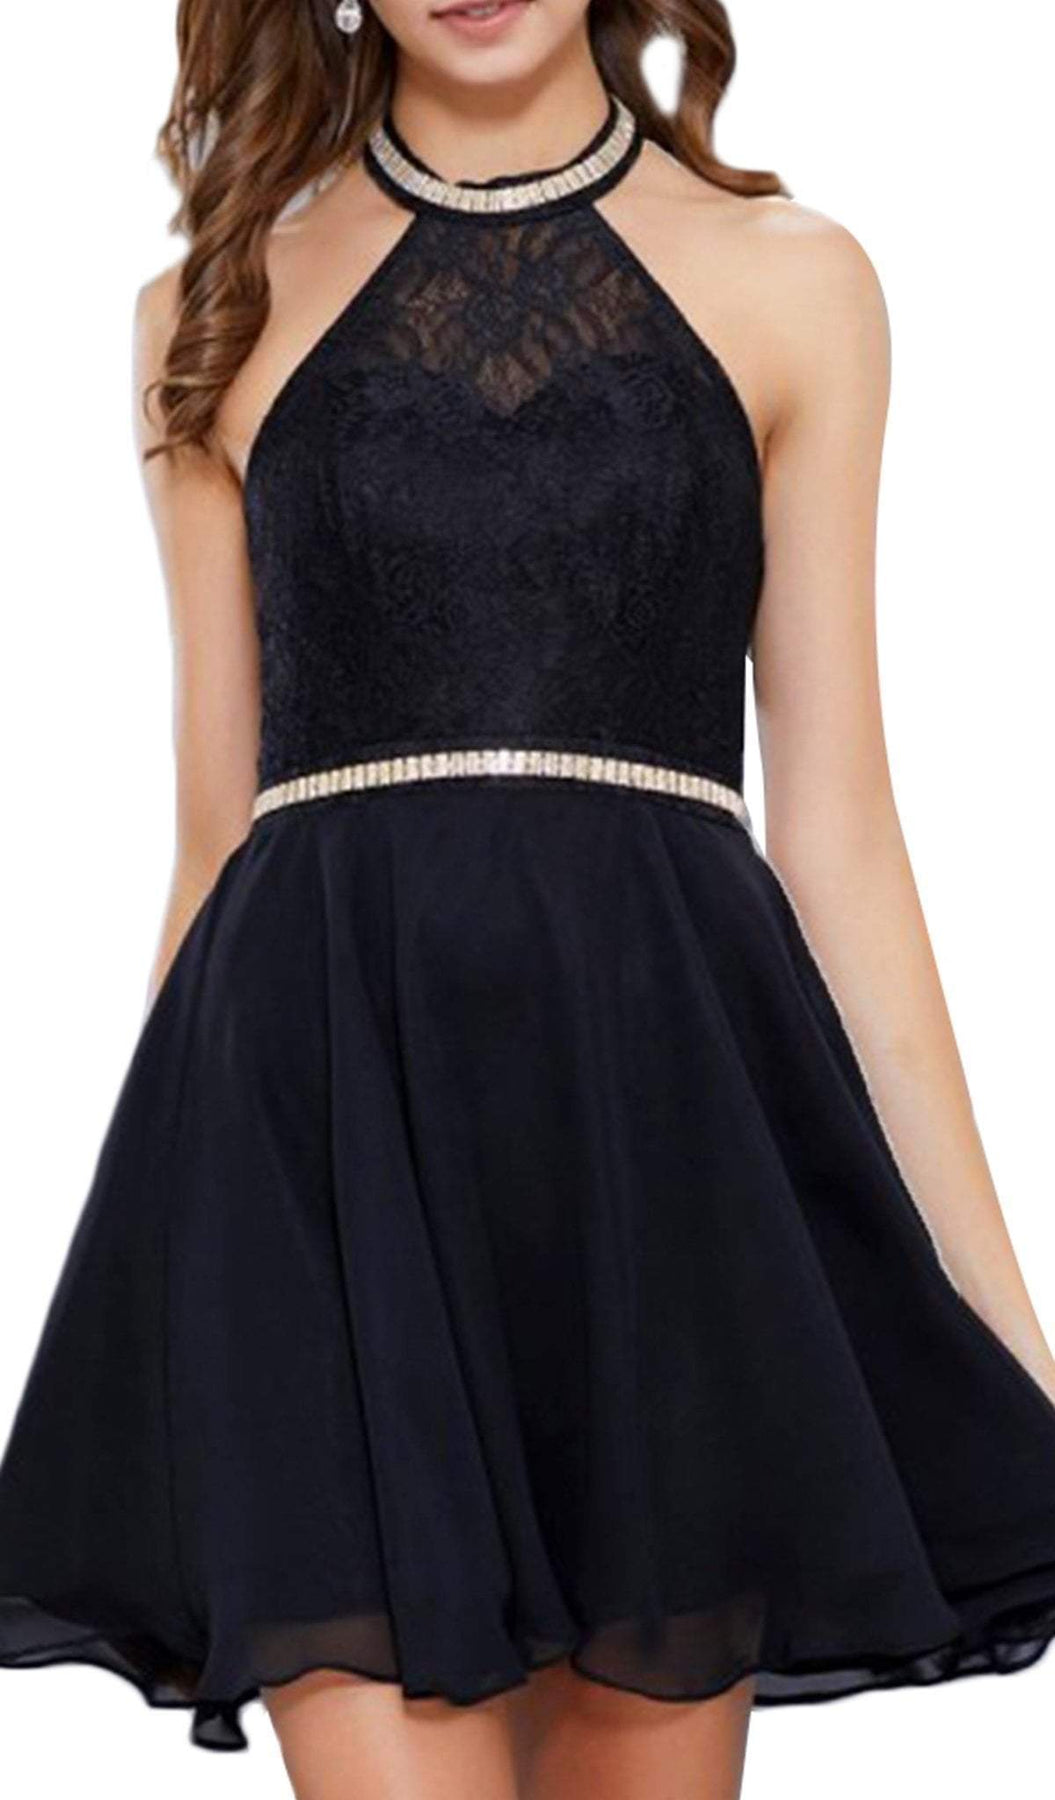 Nox Anabel - 6225 Illusion High Halter Lace Cocktail Dress Special Occasion Dress